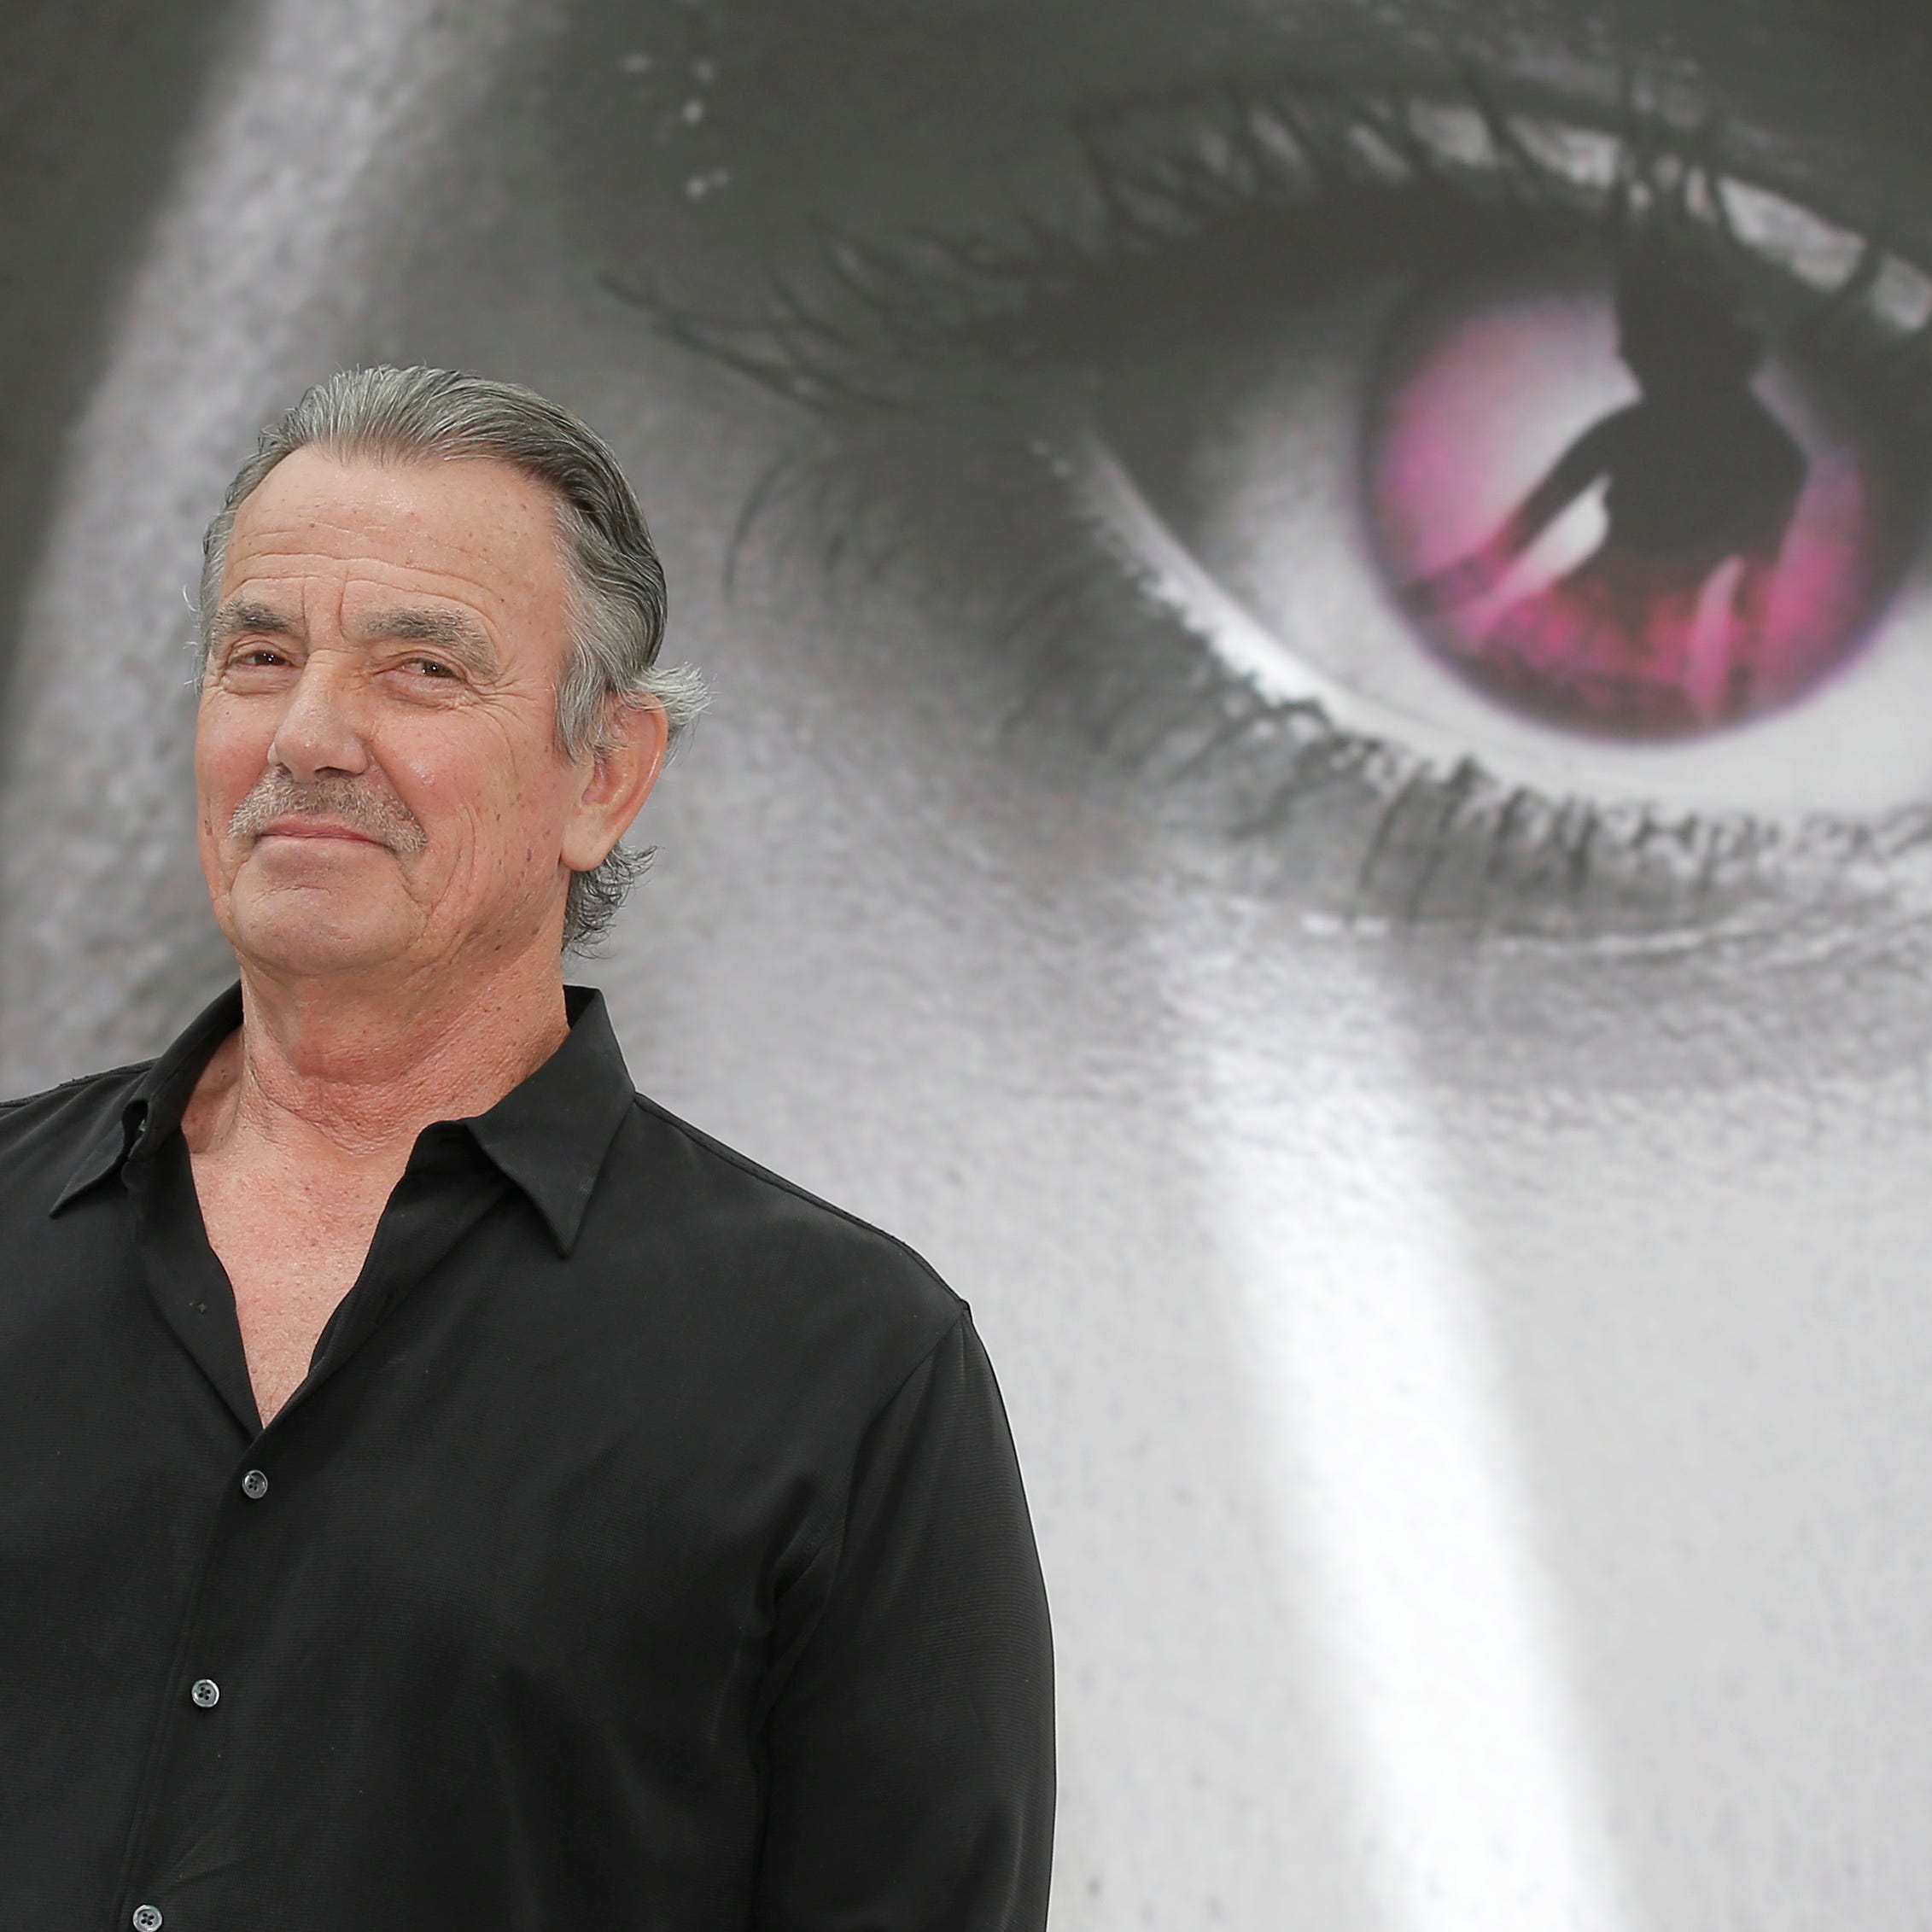 Actor Eric Braeden of TV series "The Young and the Restless" poses for photographers during the 2013 Monte Carlo Television Festival, Monday, June 10 , 2013, in Monaco. (AP Photo/Lionel Cironneau)  ORG XMIT: OTK